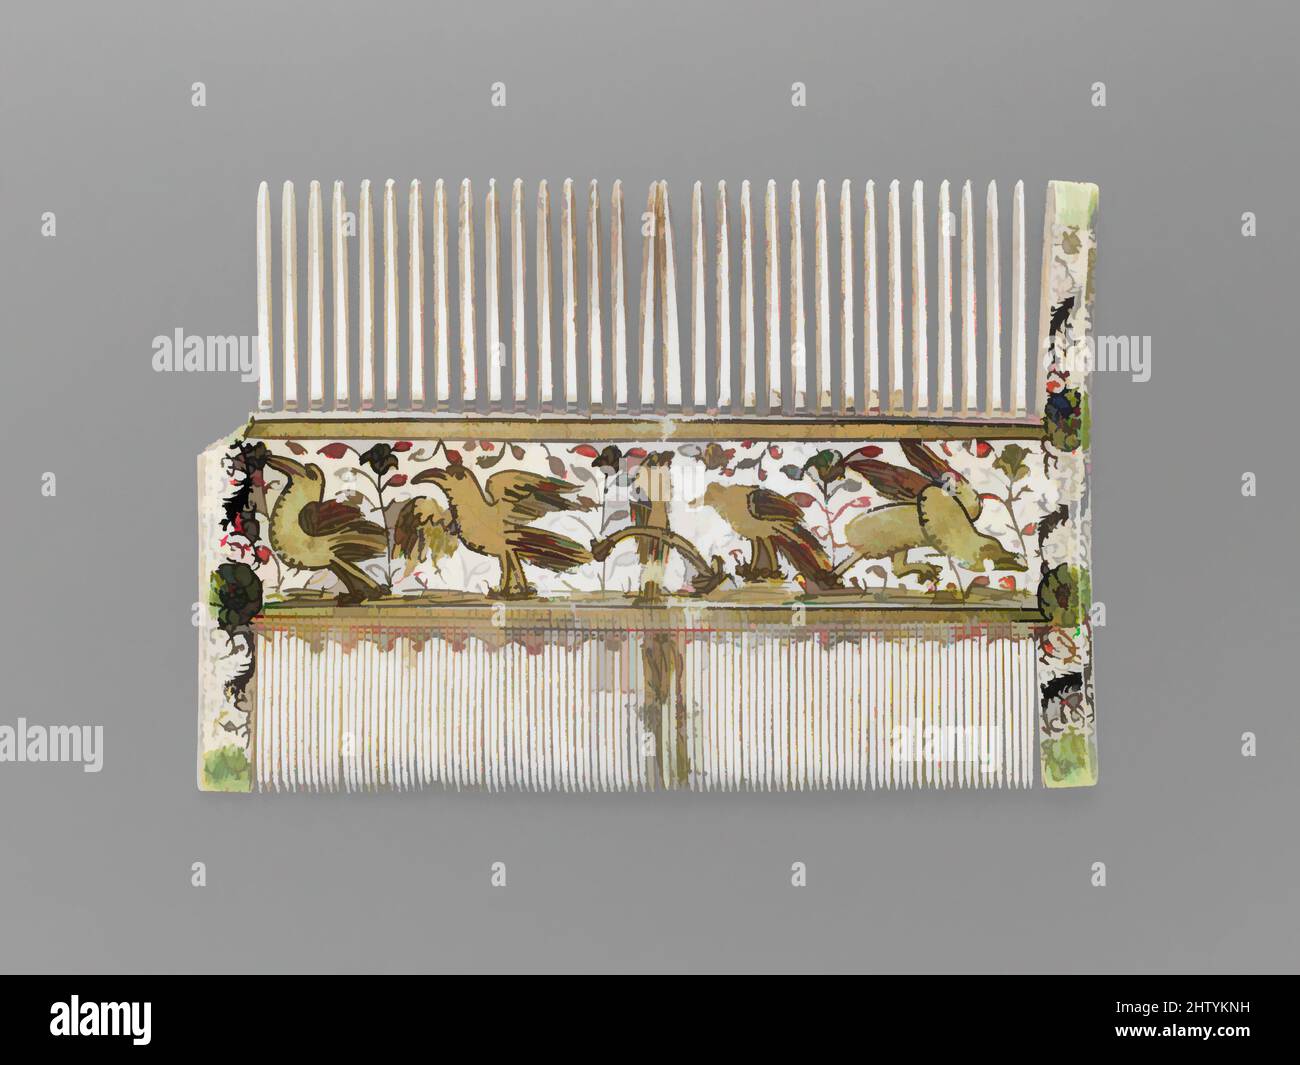 Art inspired by Woman's Comb, 15th or 16th century, French or Italian, Ivory, paint and gilding, Overall: 3 7/16 x 5 1/16 x 3/16 in. (8.8 x 12.9 x 0.4 cm), Ivories, Combs and other personal grooming implements were often included in bridal trousseaux during the fifteenth and sixteenth, Classic works modernized by Artotop with a splash of modernity. Shapes, color and value, eye-catching visual impact on art. Emotions through freedom of artworks in a contemporary way. A timeless message pursuing a wildly creative new direction. Artists turning to the digital medium and creating the Artotop NFT Stock Photo